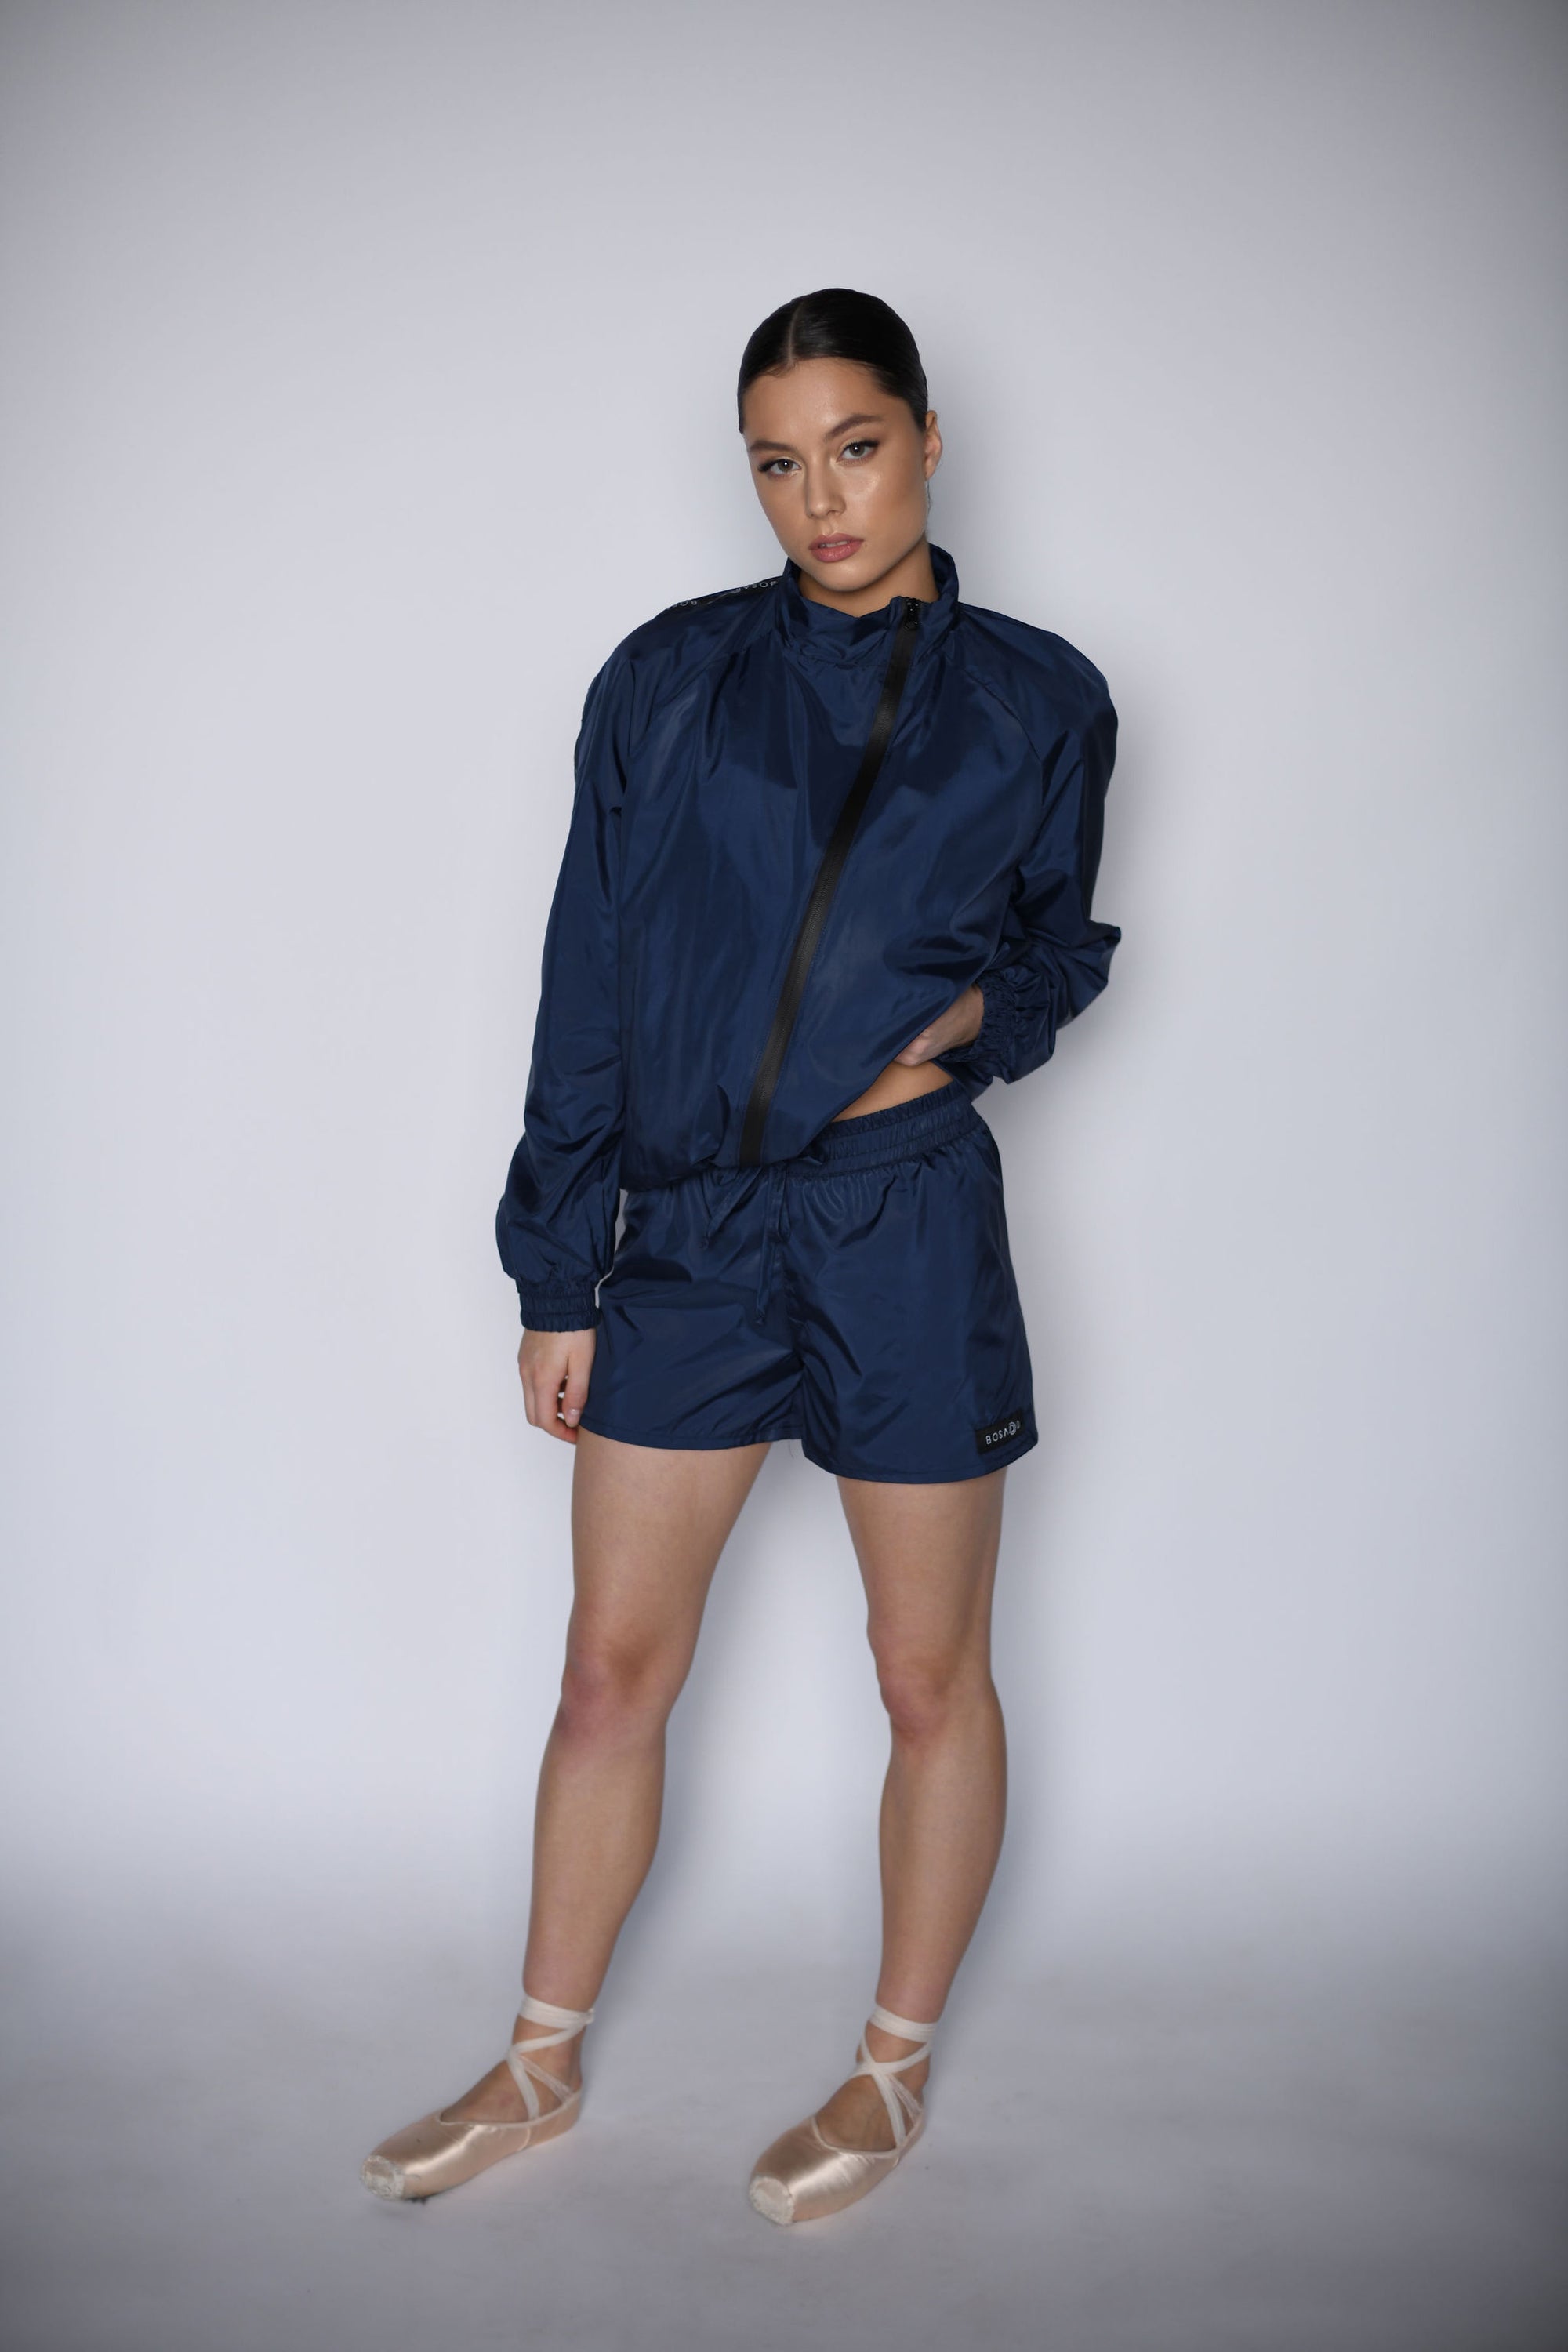 NEW URBAN SWAN COLLECTION S/S 23 | Royal blue sports suit with shorts